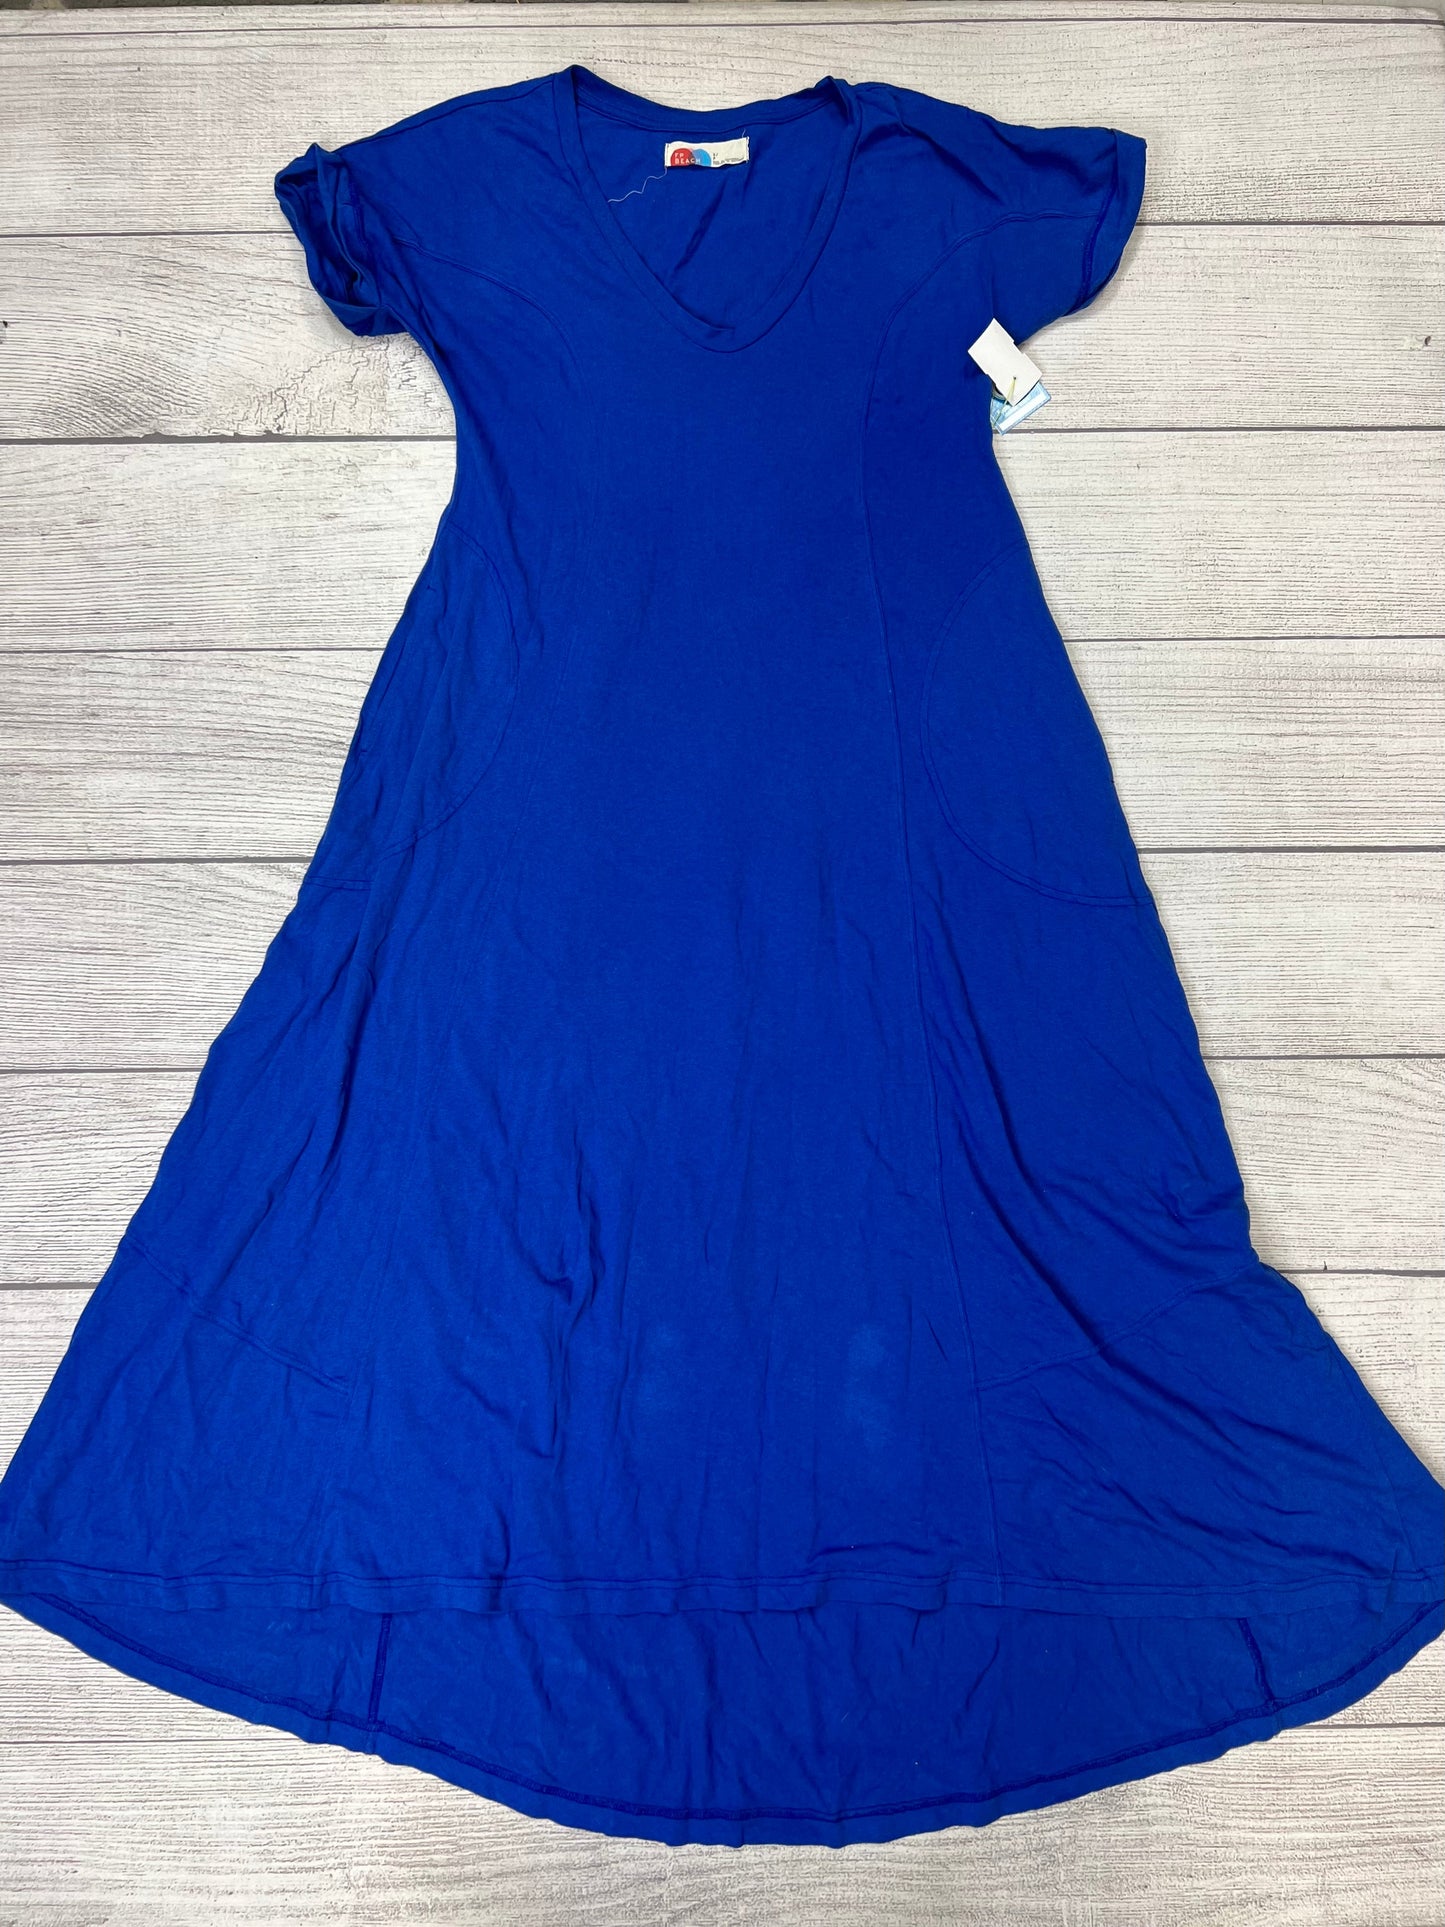 Blue Dress Casual Maxi Free People, Size S